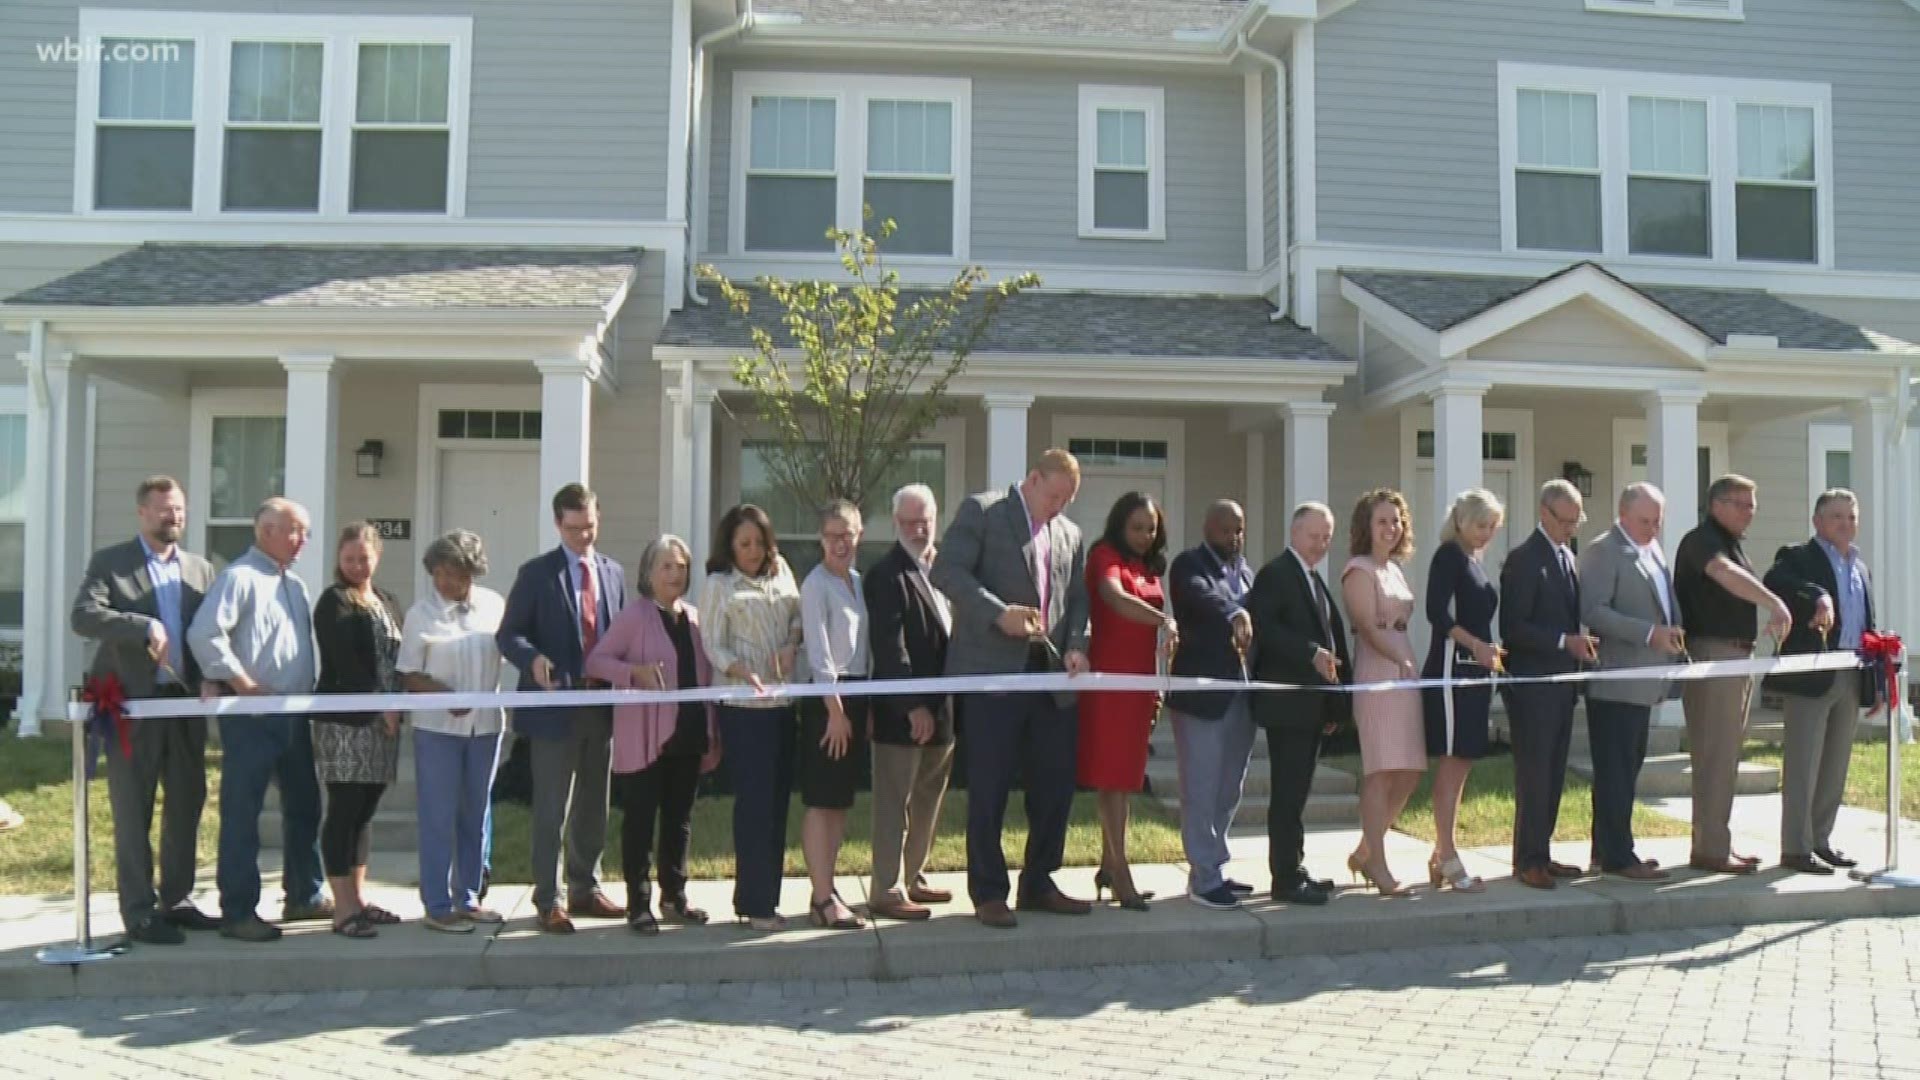 City and county leaders today cut the ribbon on 'Five Points III' -- a new affordable housing complex in East Knoxville.